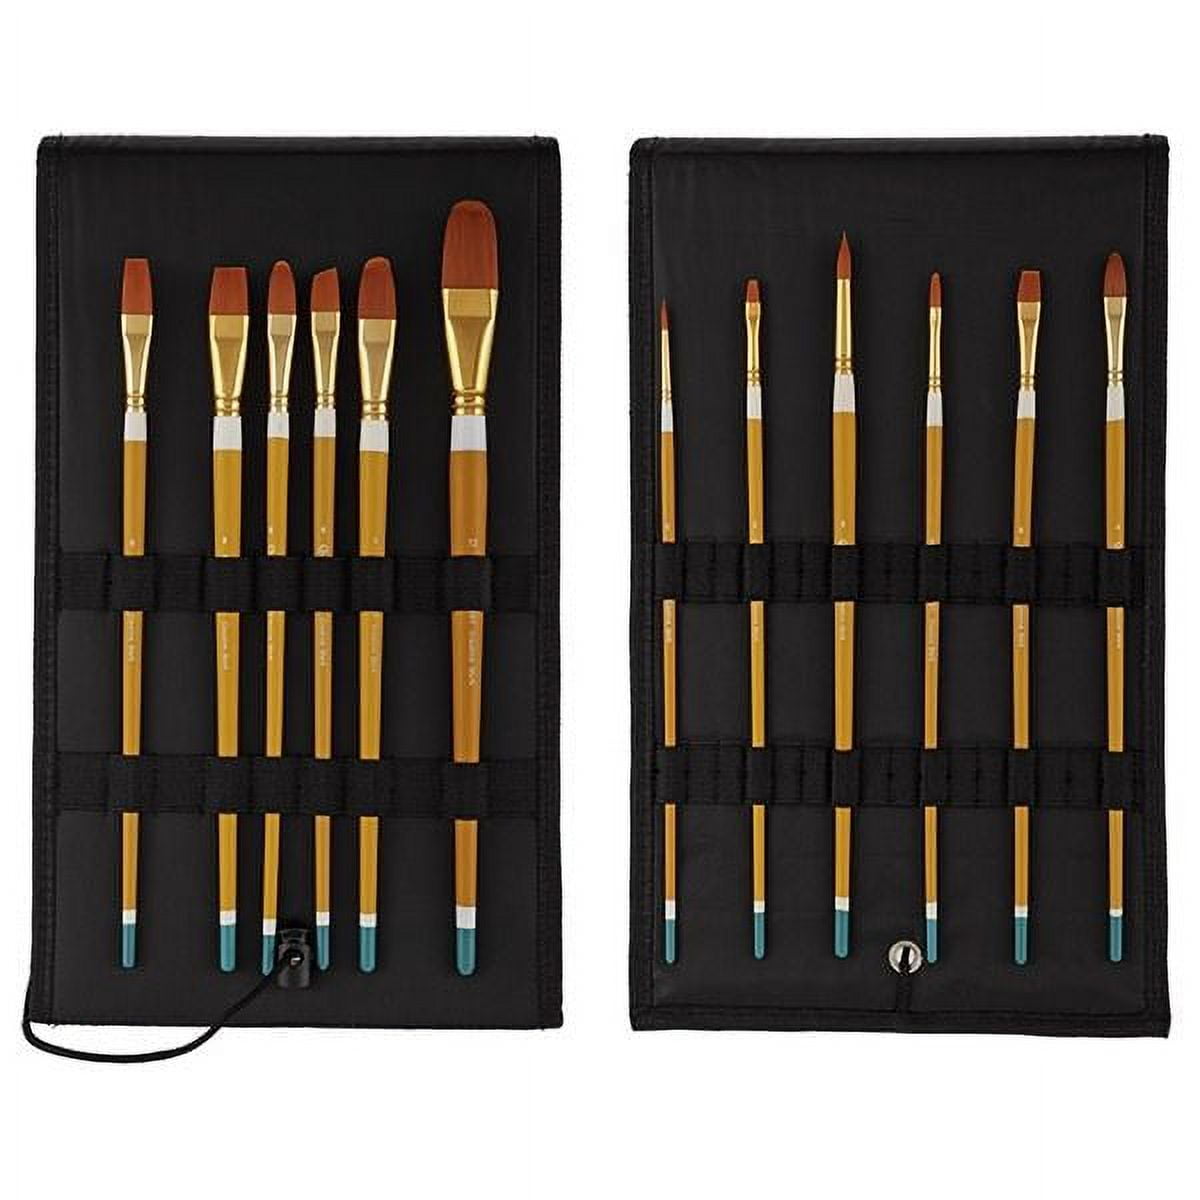 Creative Mark Artist Staccato Paint Brush Set of 8, Short Handle Paintbrushes for Acrylics, Watercolor & Gouache, Includes Organizer Traveling Case